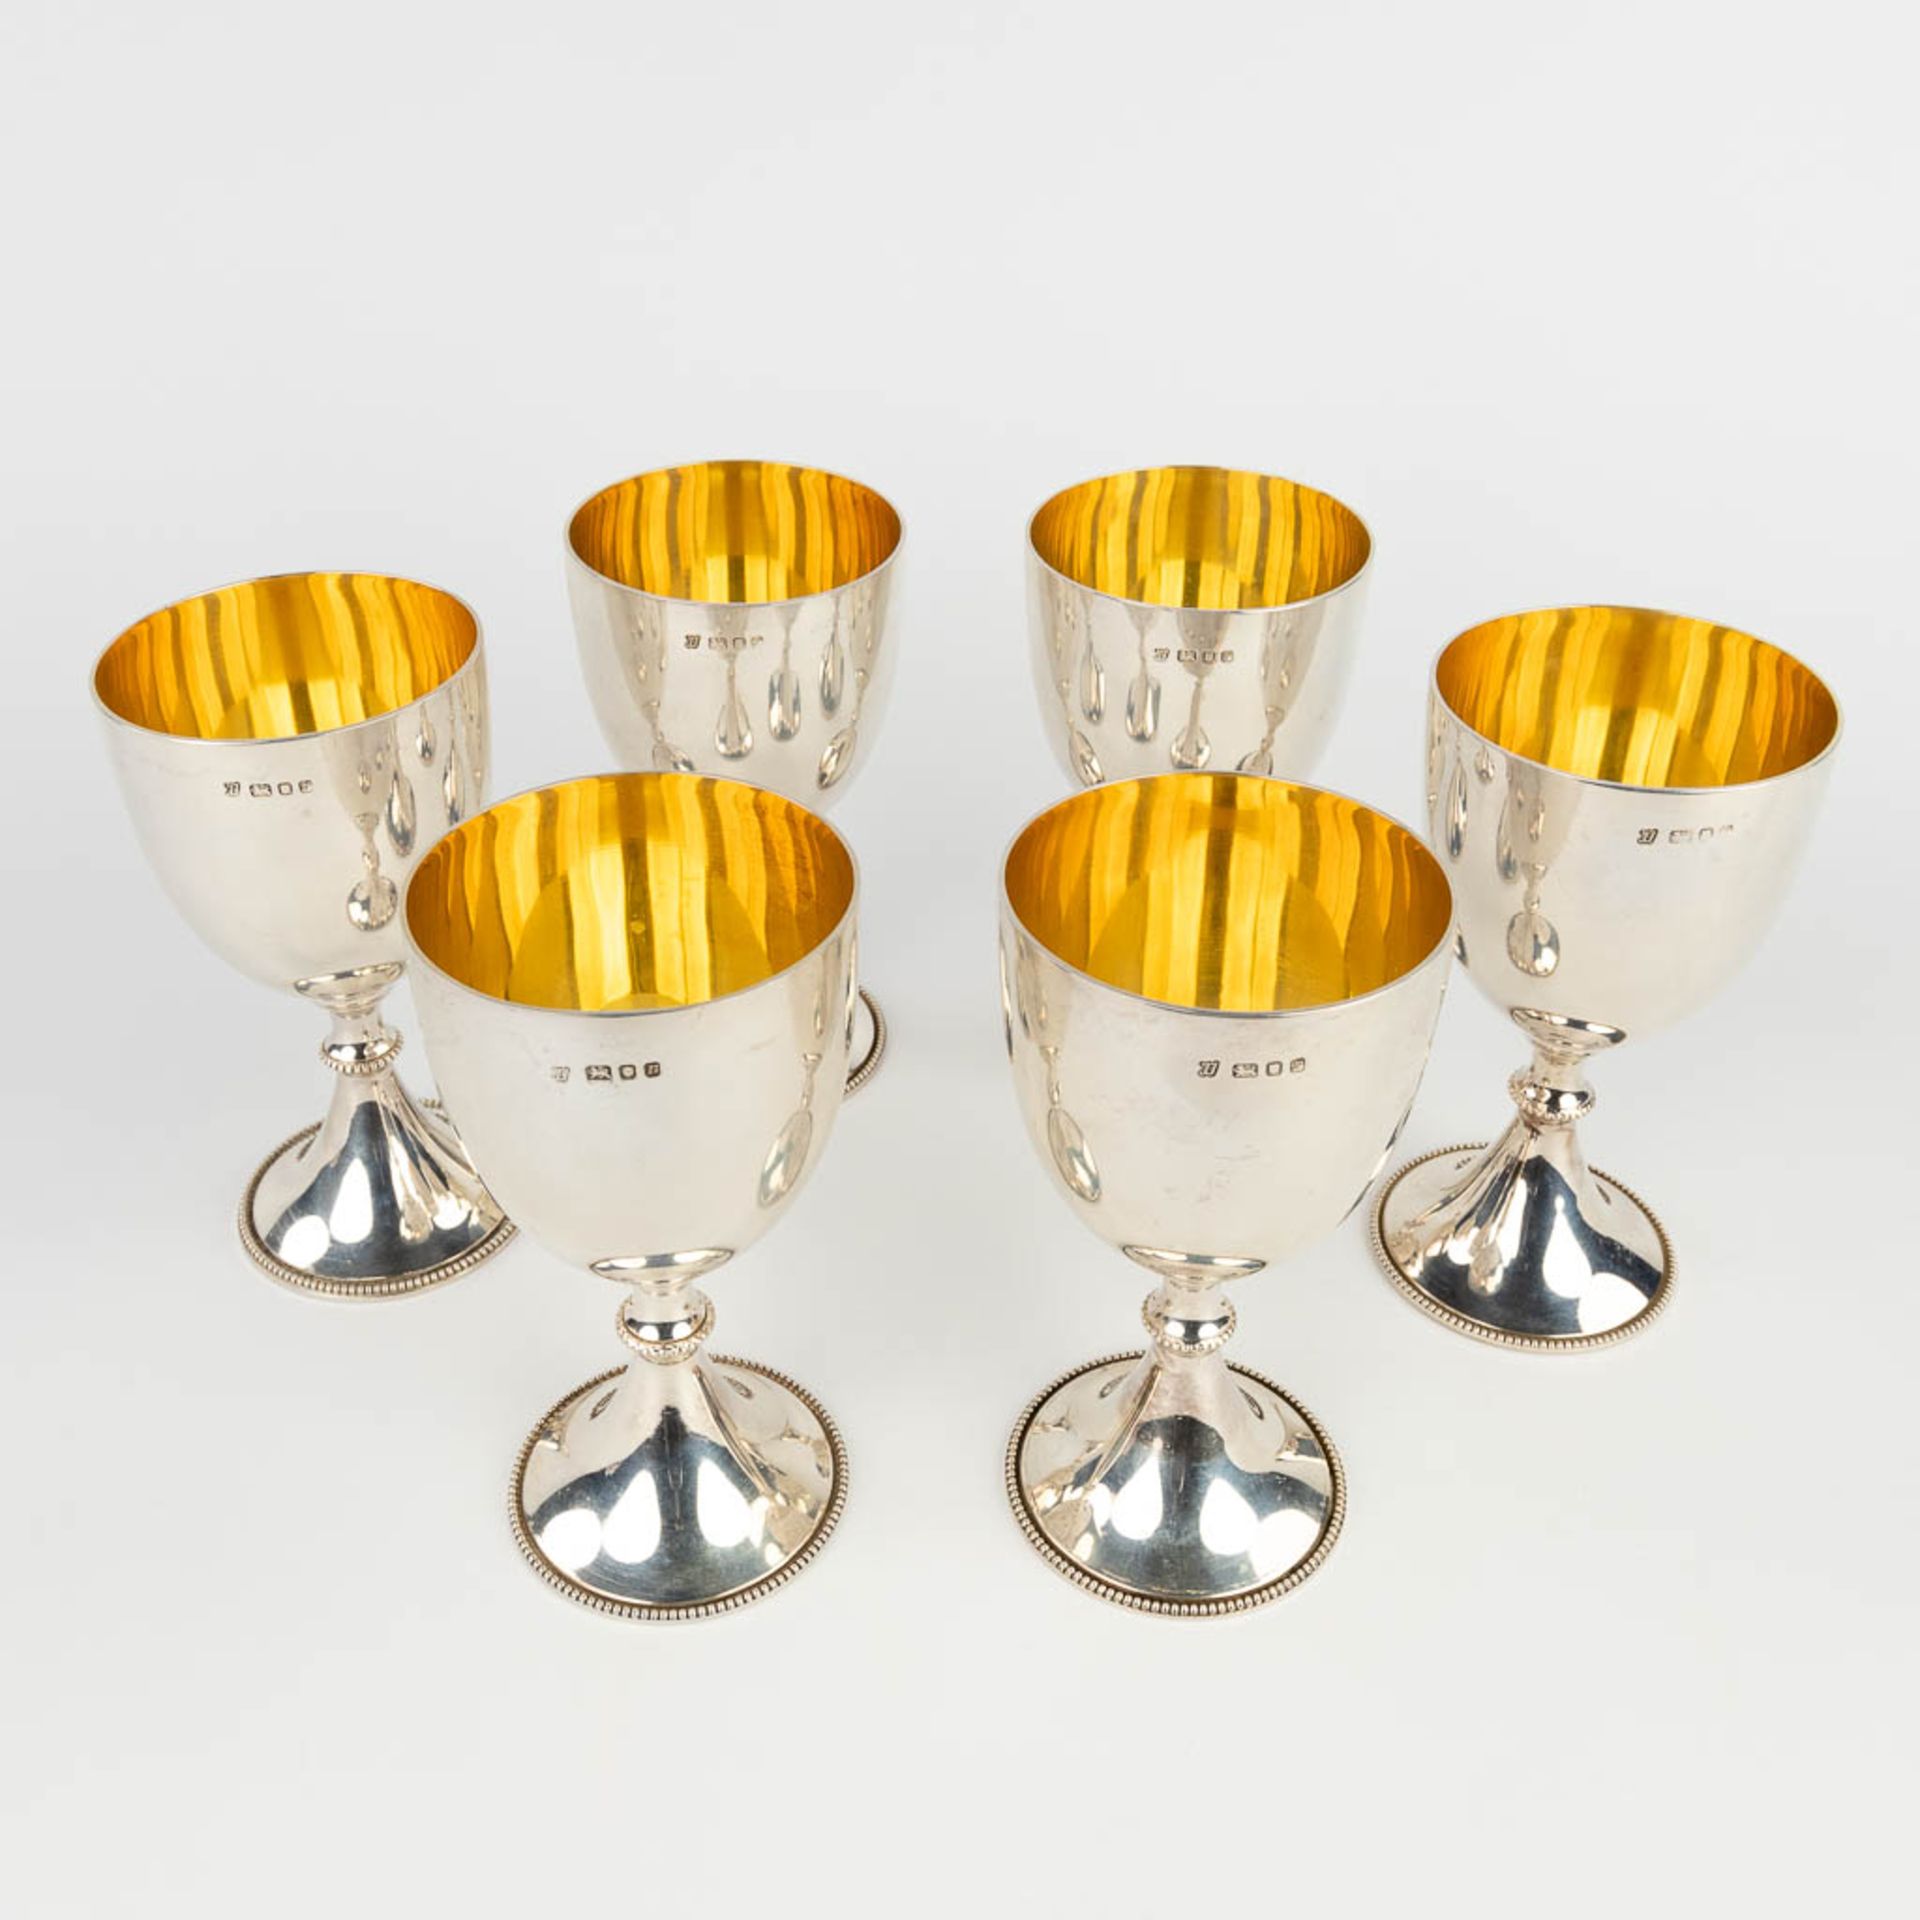 A set of 6 silver goblets, made by Trevor Towner in England, 1972. 1097g. (H: 14,5 x D: 7,5 cm)